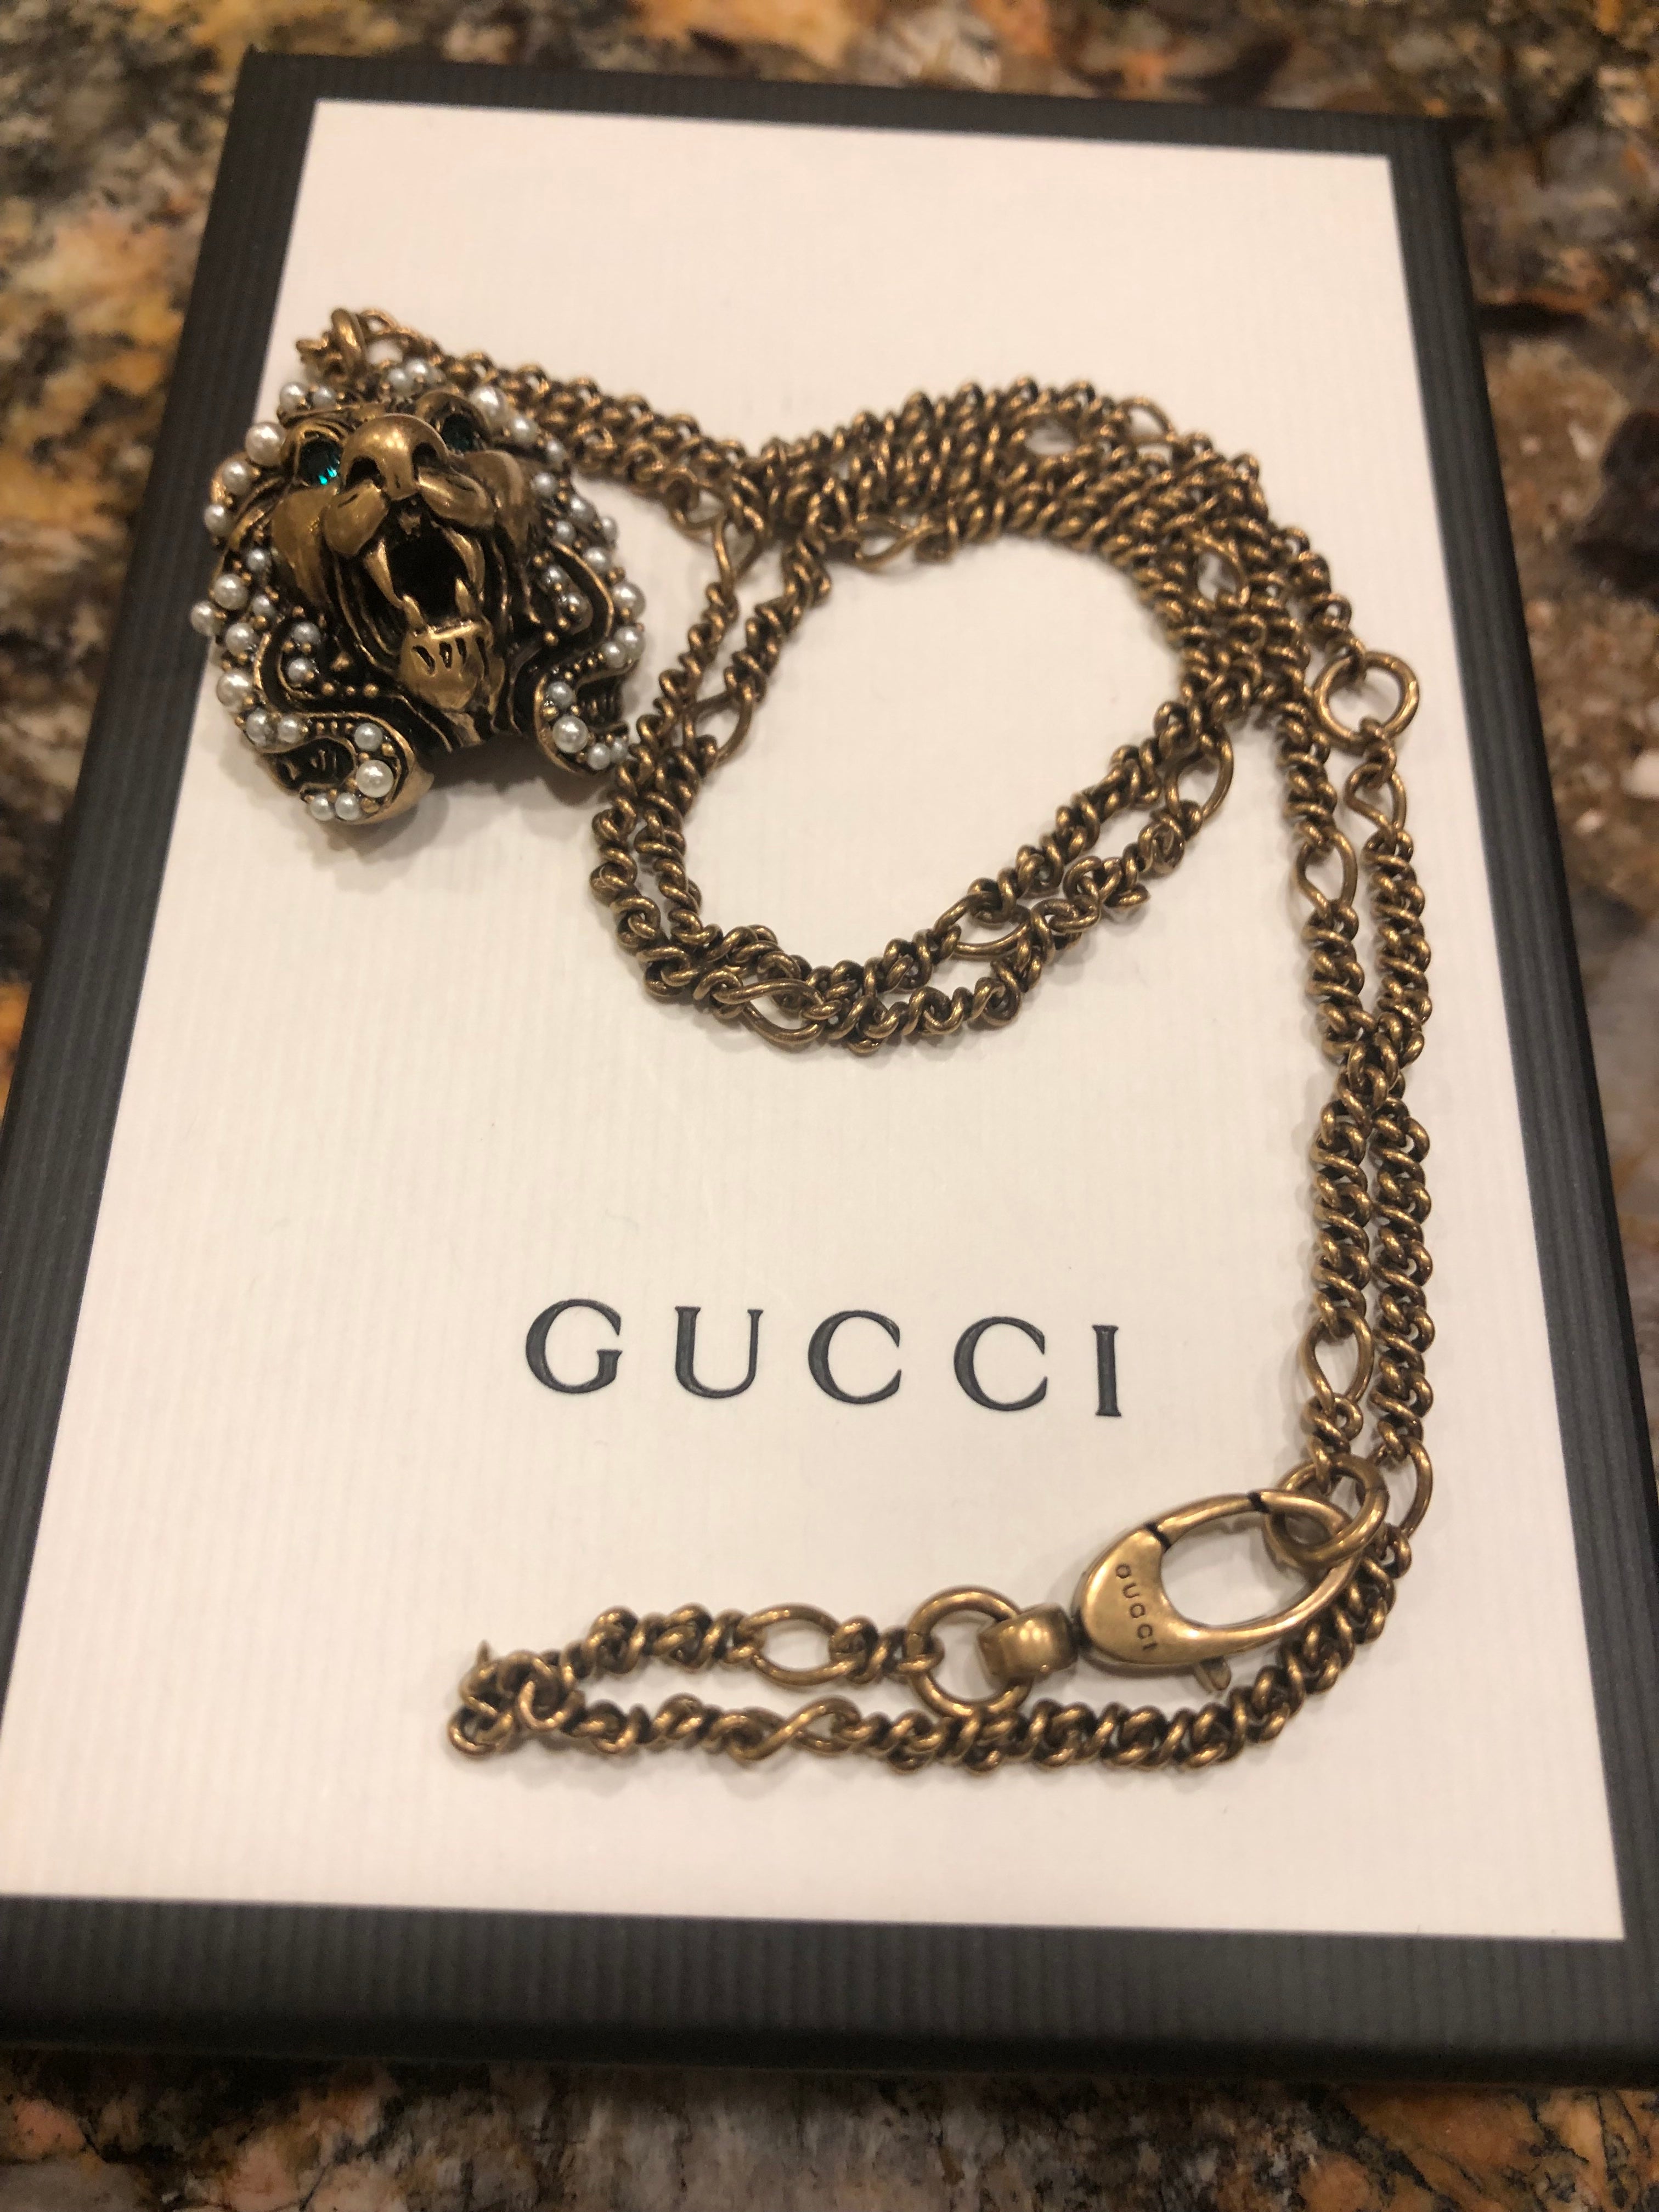 Gucci necklace with lion head pendant Cost £650